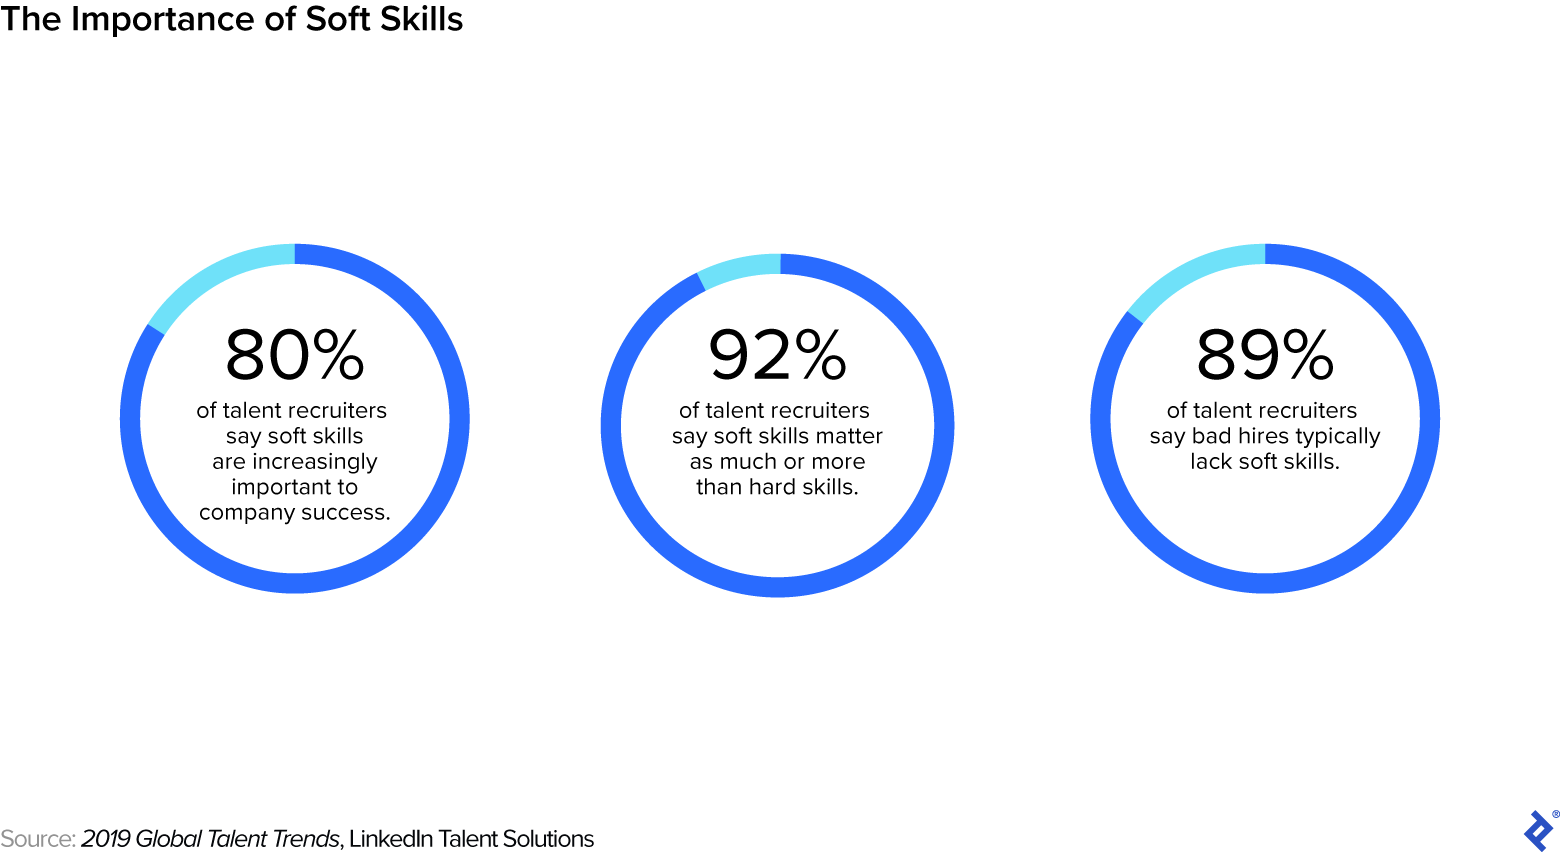 An infographic titled âThe Importance of Soft Skillsâ displays survey data collected by LinkedIn's 2019 Global Talent Trends report. There are three circles. In the first, 80% of respondents say soft skills are increasingly important to company success; in the second, 92% of respondents say soft skills matter as much or more than hard skills; in the third, 89% of respondents say bad hires typically lack soft skills.